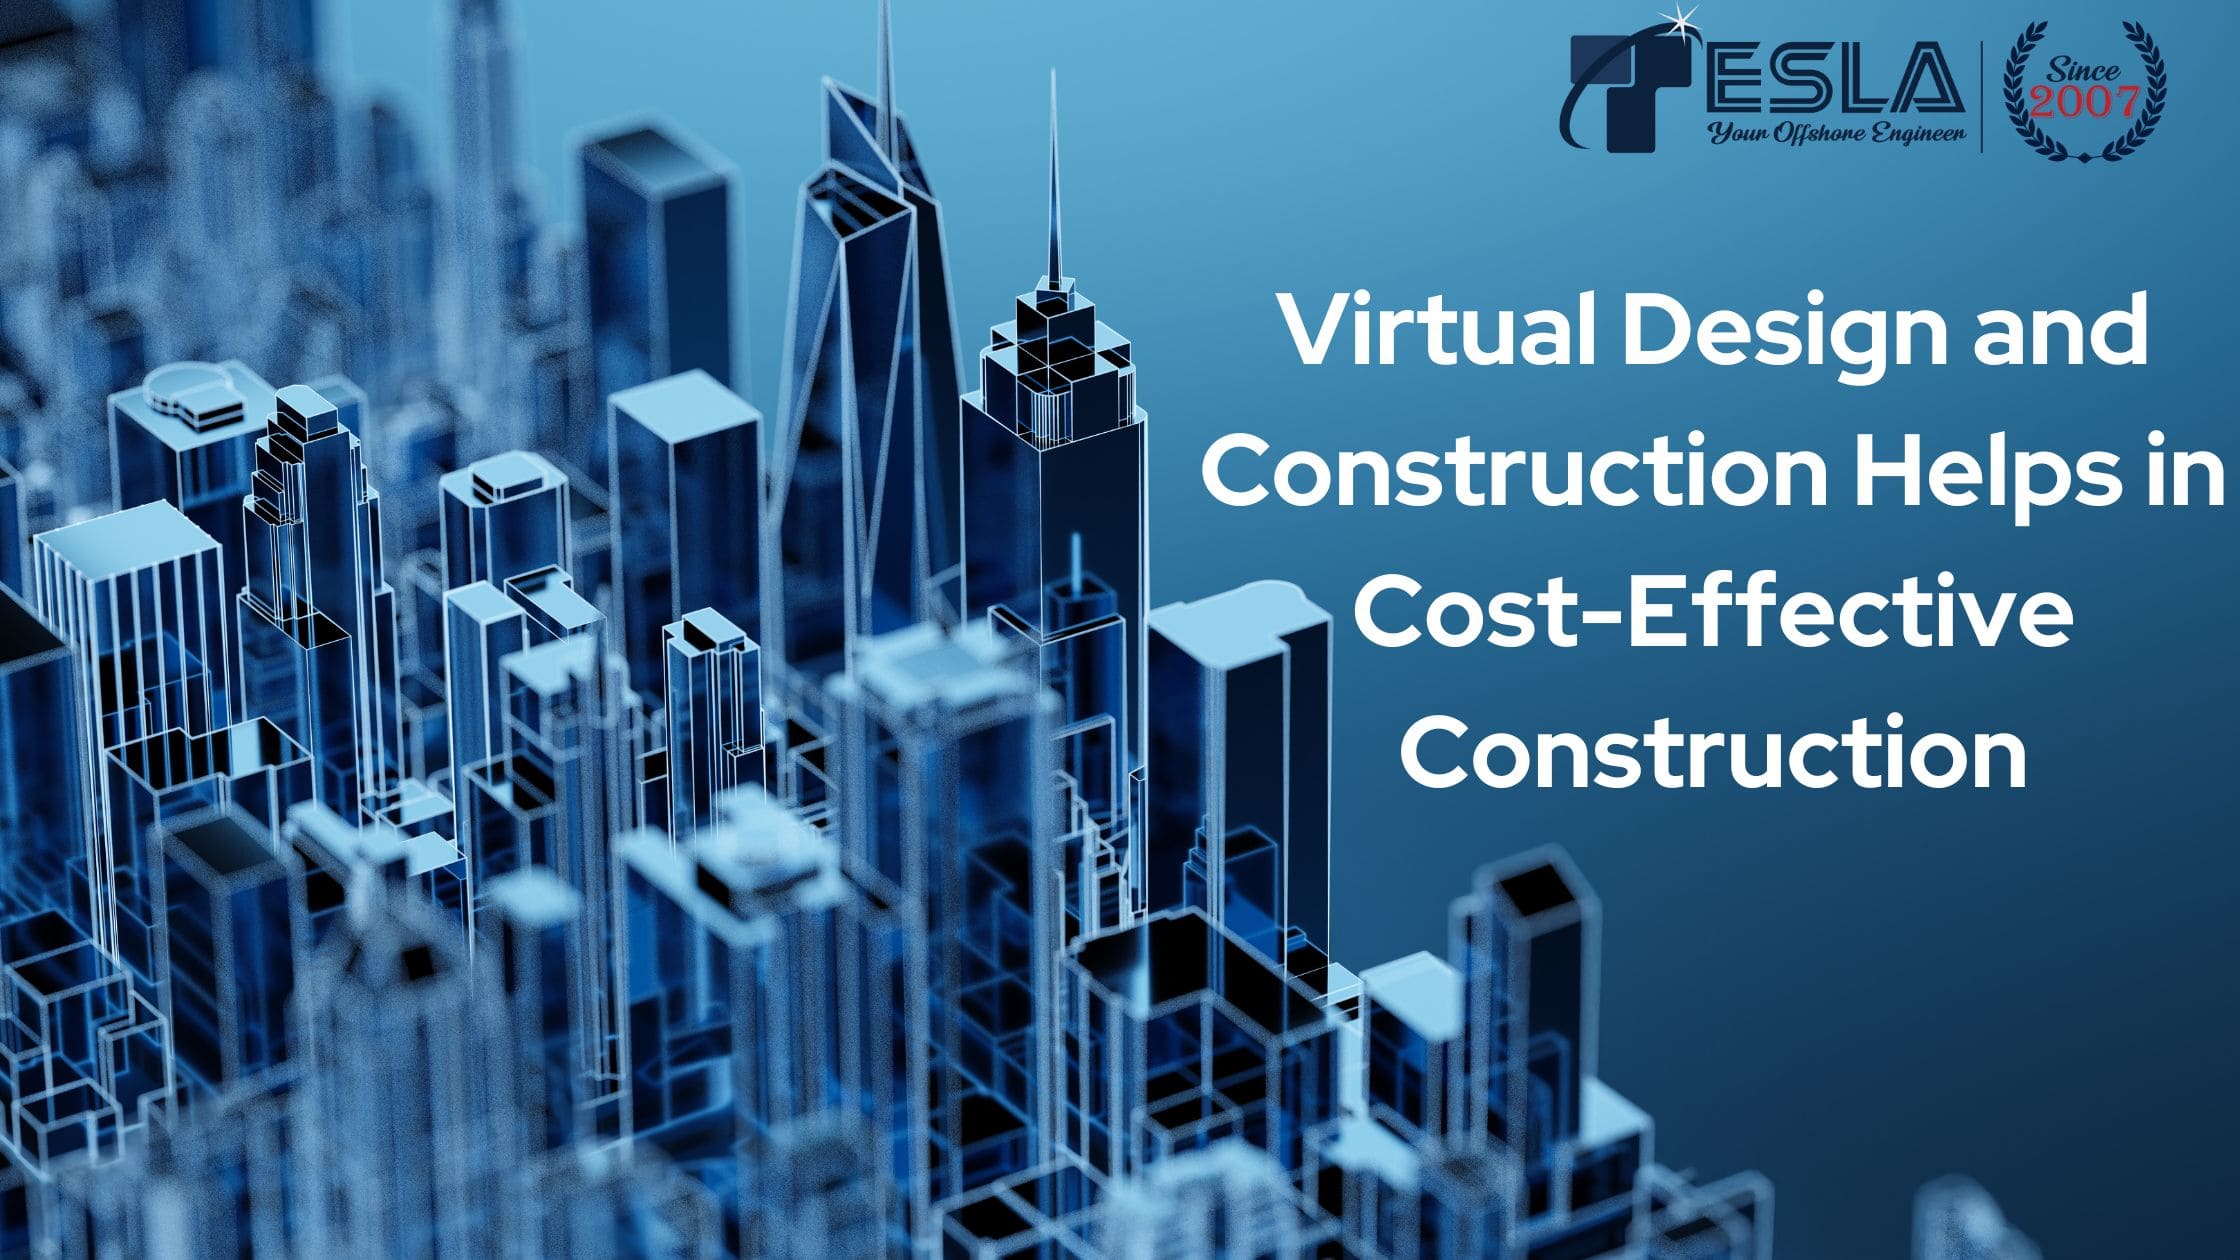 How Virtual Design and Construction Helps in Cost-Effective Construction